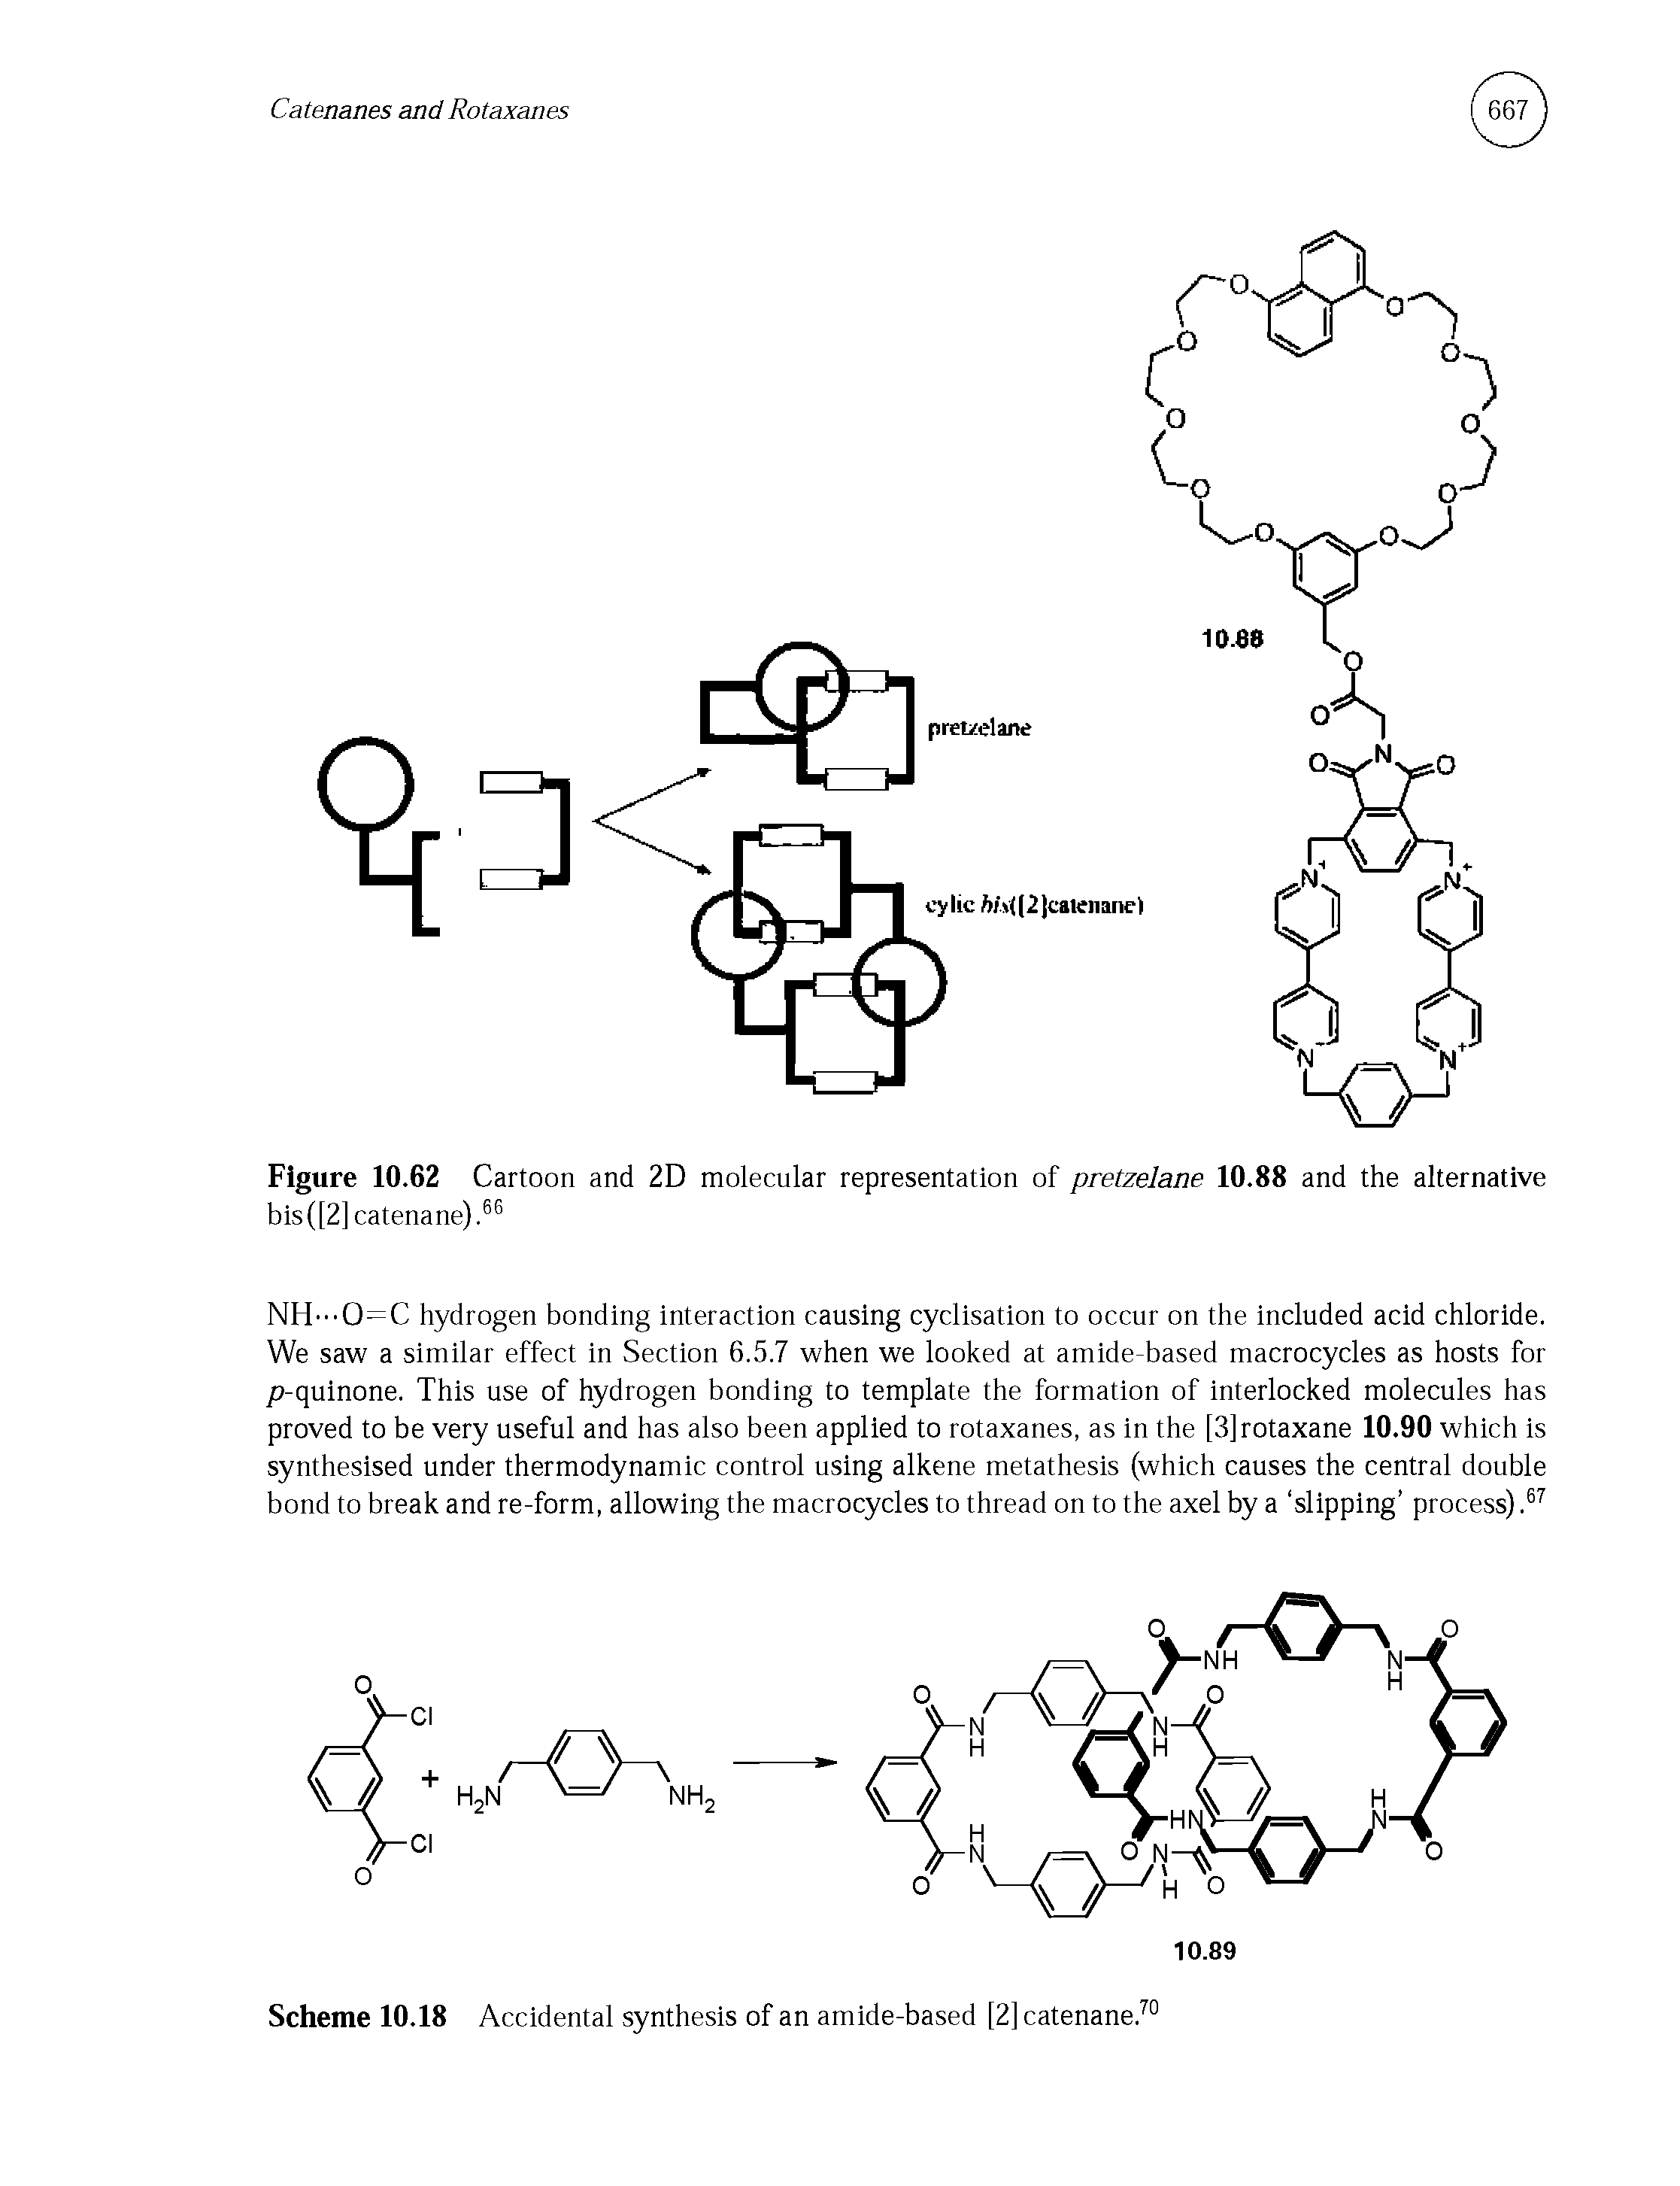 Scheme 10.18 Accidental synthesis of an amide-based [2] catenane.70...